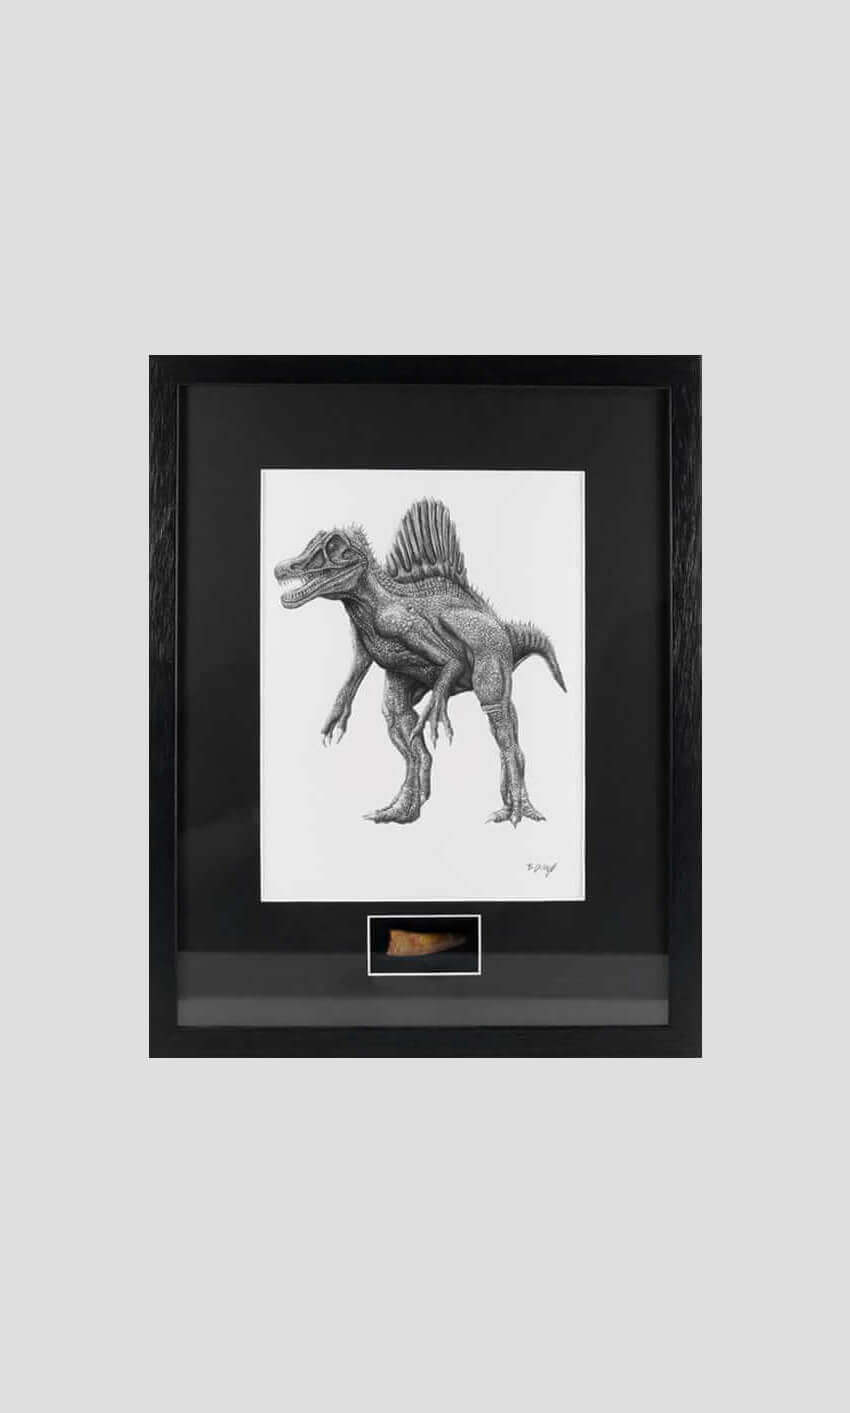 Spinosaurus dinosaur tooth for sale in a black frame